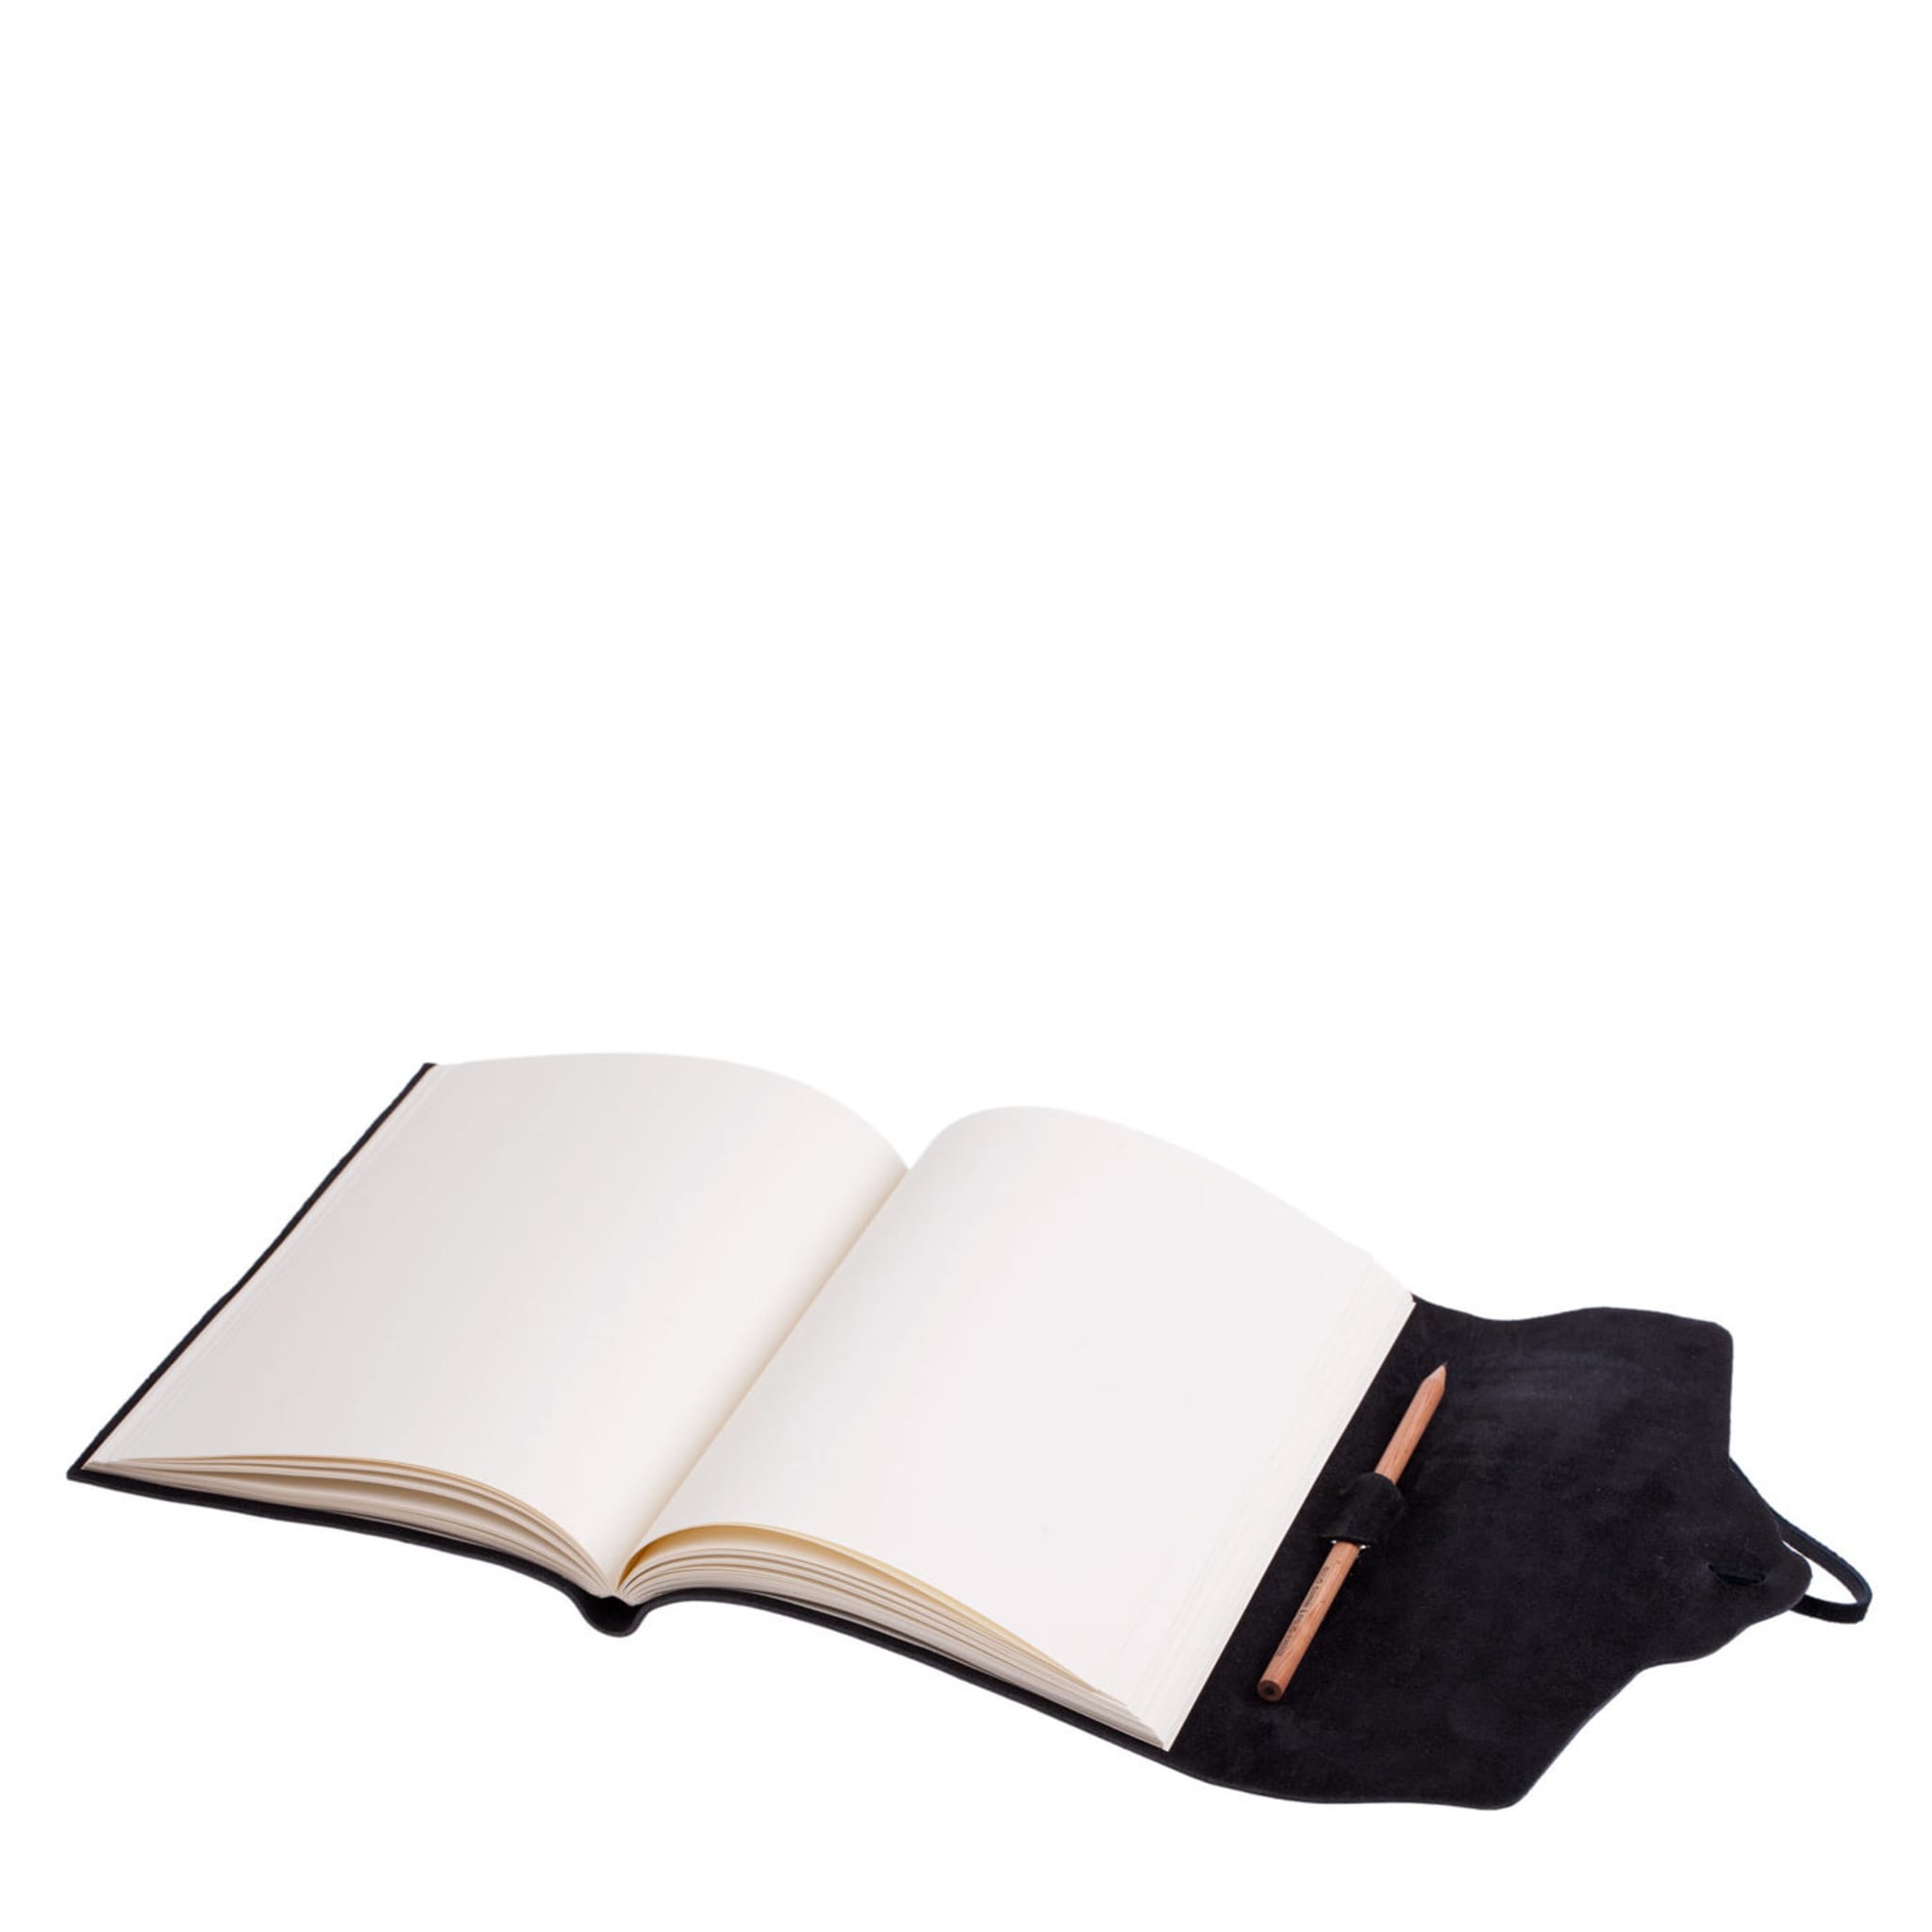 Lace Black Leather Notebook - Alternative view 1